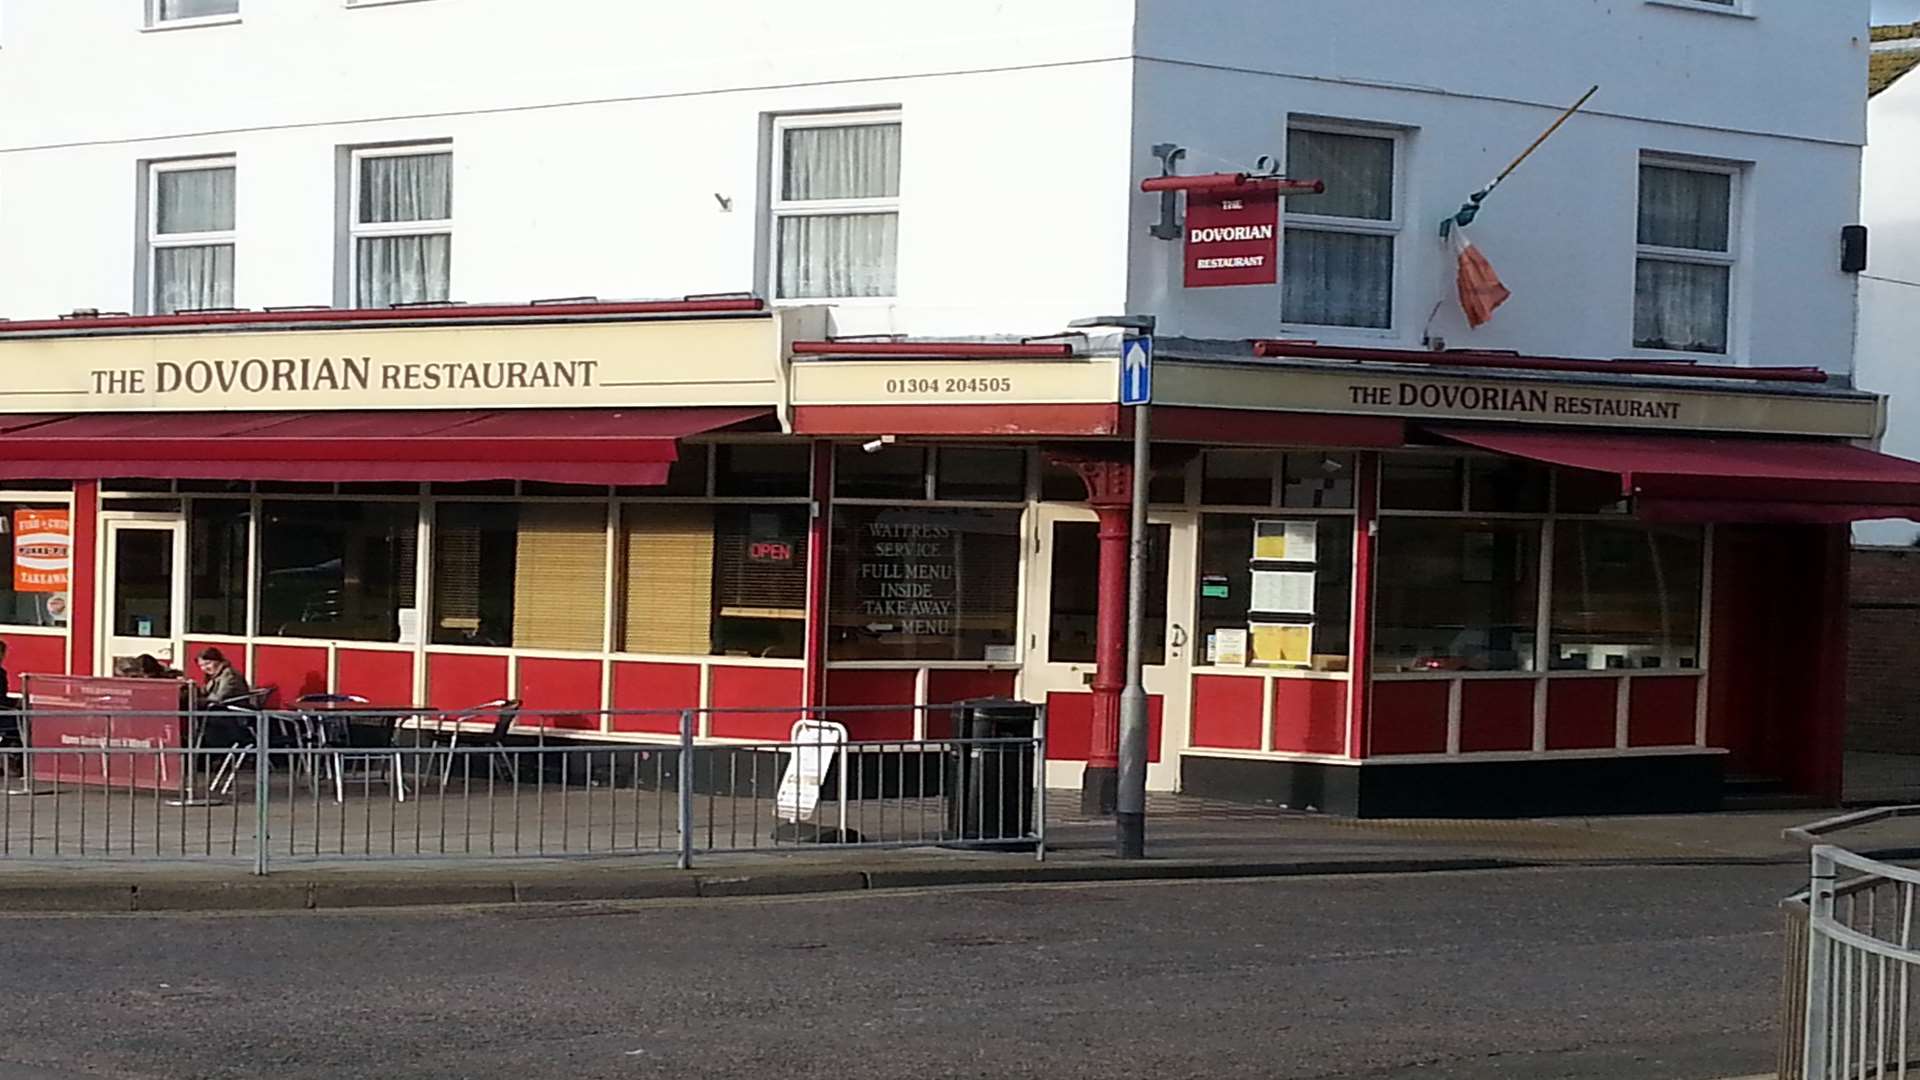 The Dovorian Restaurant - scene of one of the thefts